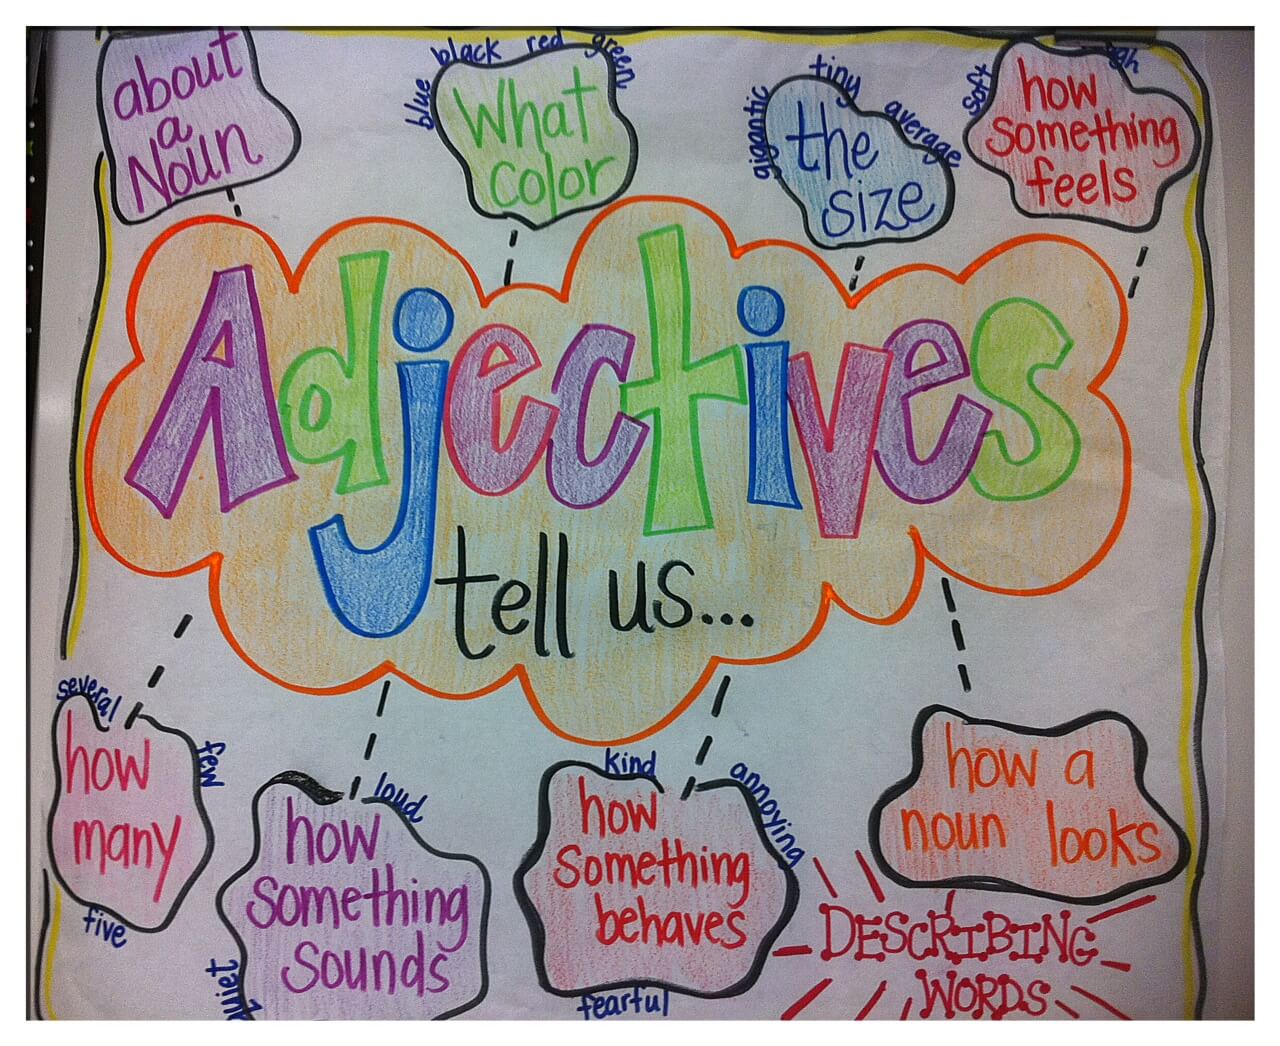 comparative adjectives anchor chart